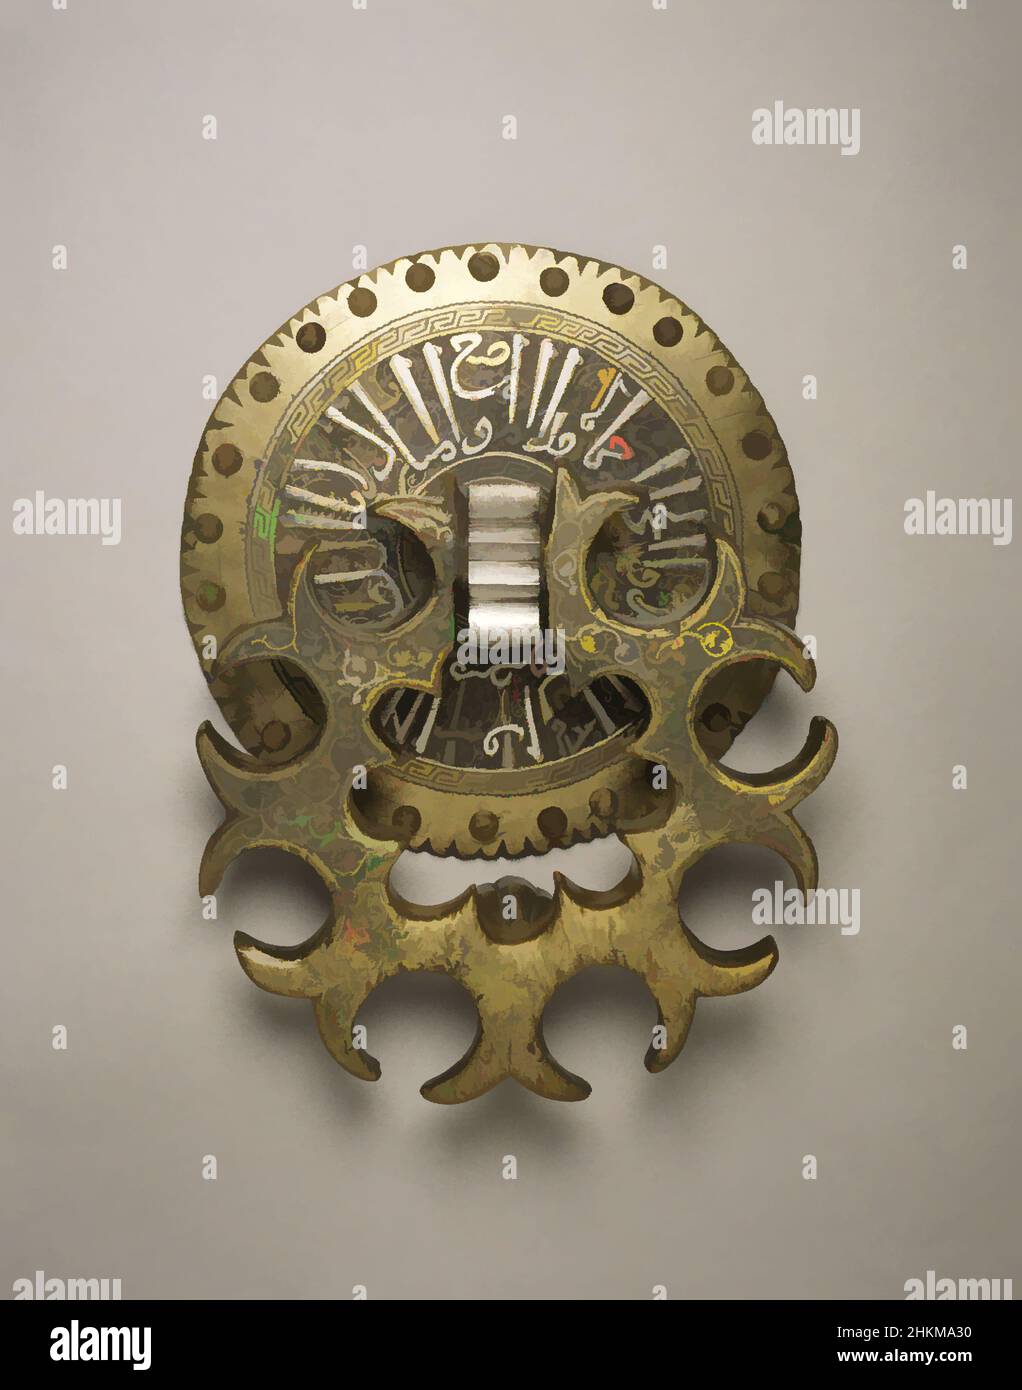 Art inspired by Door Knocker with Eight Lobes and Arabic Inscription on Backplate, Egyptian, Mamluk period, 1250-1517, reign of Qalā'ūn, c.1220-1290; reigned 1279-1290, 1280-90, Brass with silver inlay, Cairo, Northern Africa, Egypt, Africa, Architectural elements, metalwork, height: 8, Classic works modernized by Artotop with a splash of modernity. Shapes, color and value, eye-catching visual impact on art. Emotions through freedom of artworks in a contemporary way. A timeless message pursuing a wildly creative new direction. Artists turning to the digital medium and creating the Artotop NFT Stock Photo